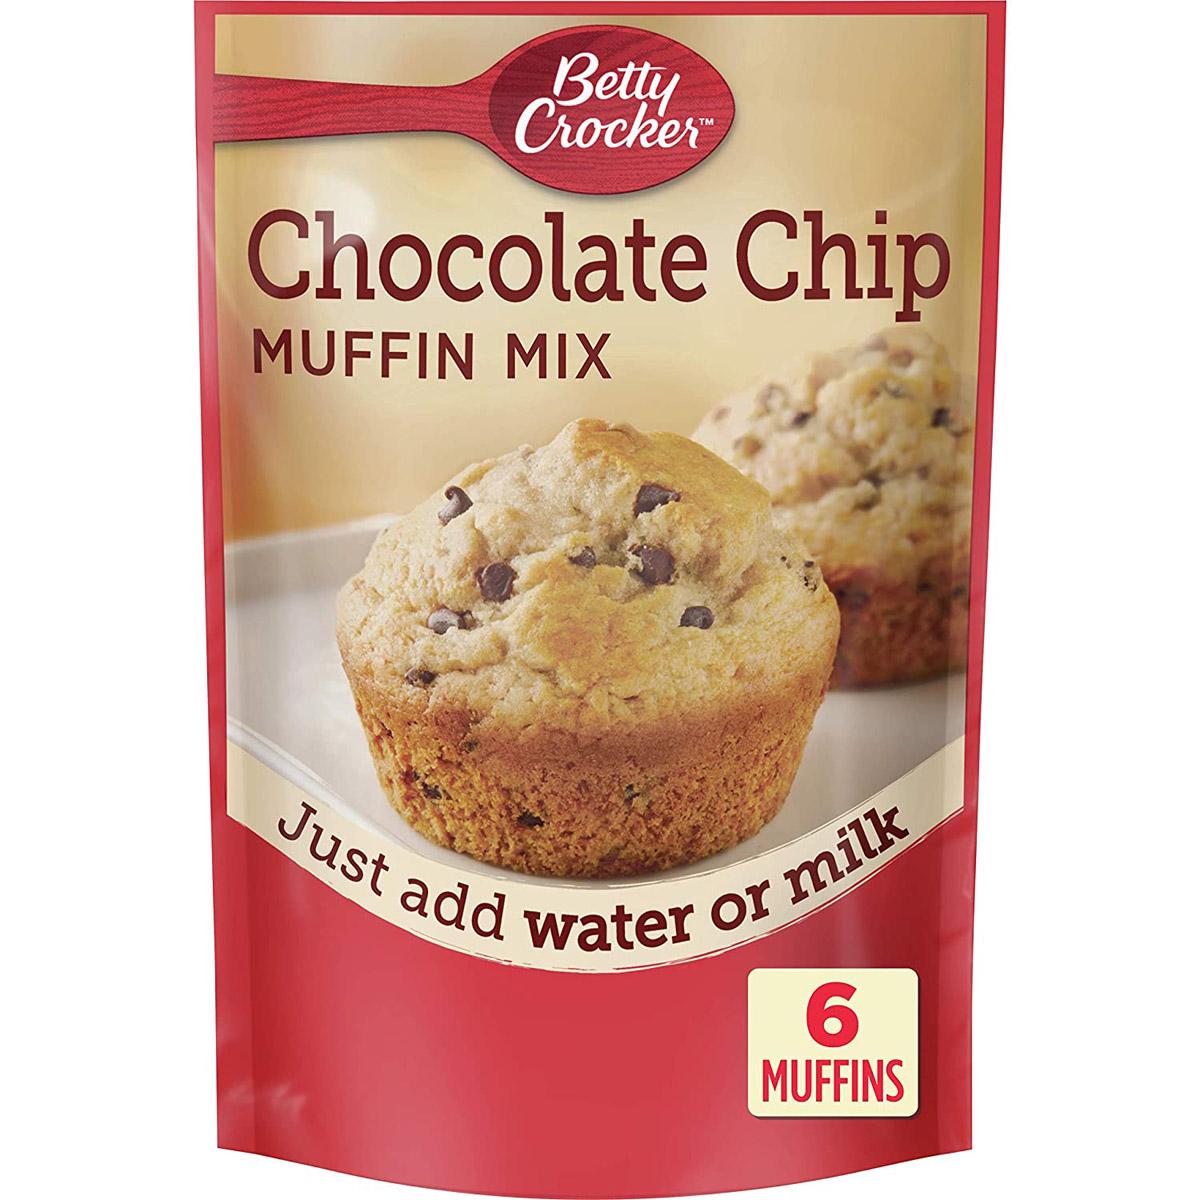 9 Betty Crocker Chocolate Chip Muffin Mix for $6.76